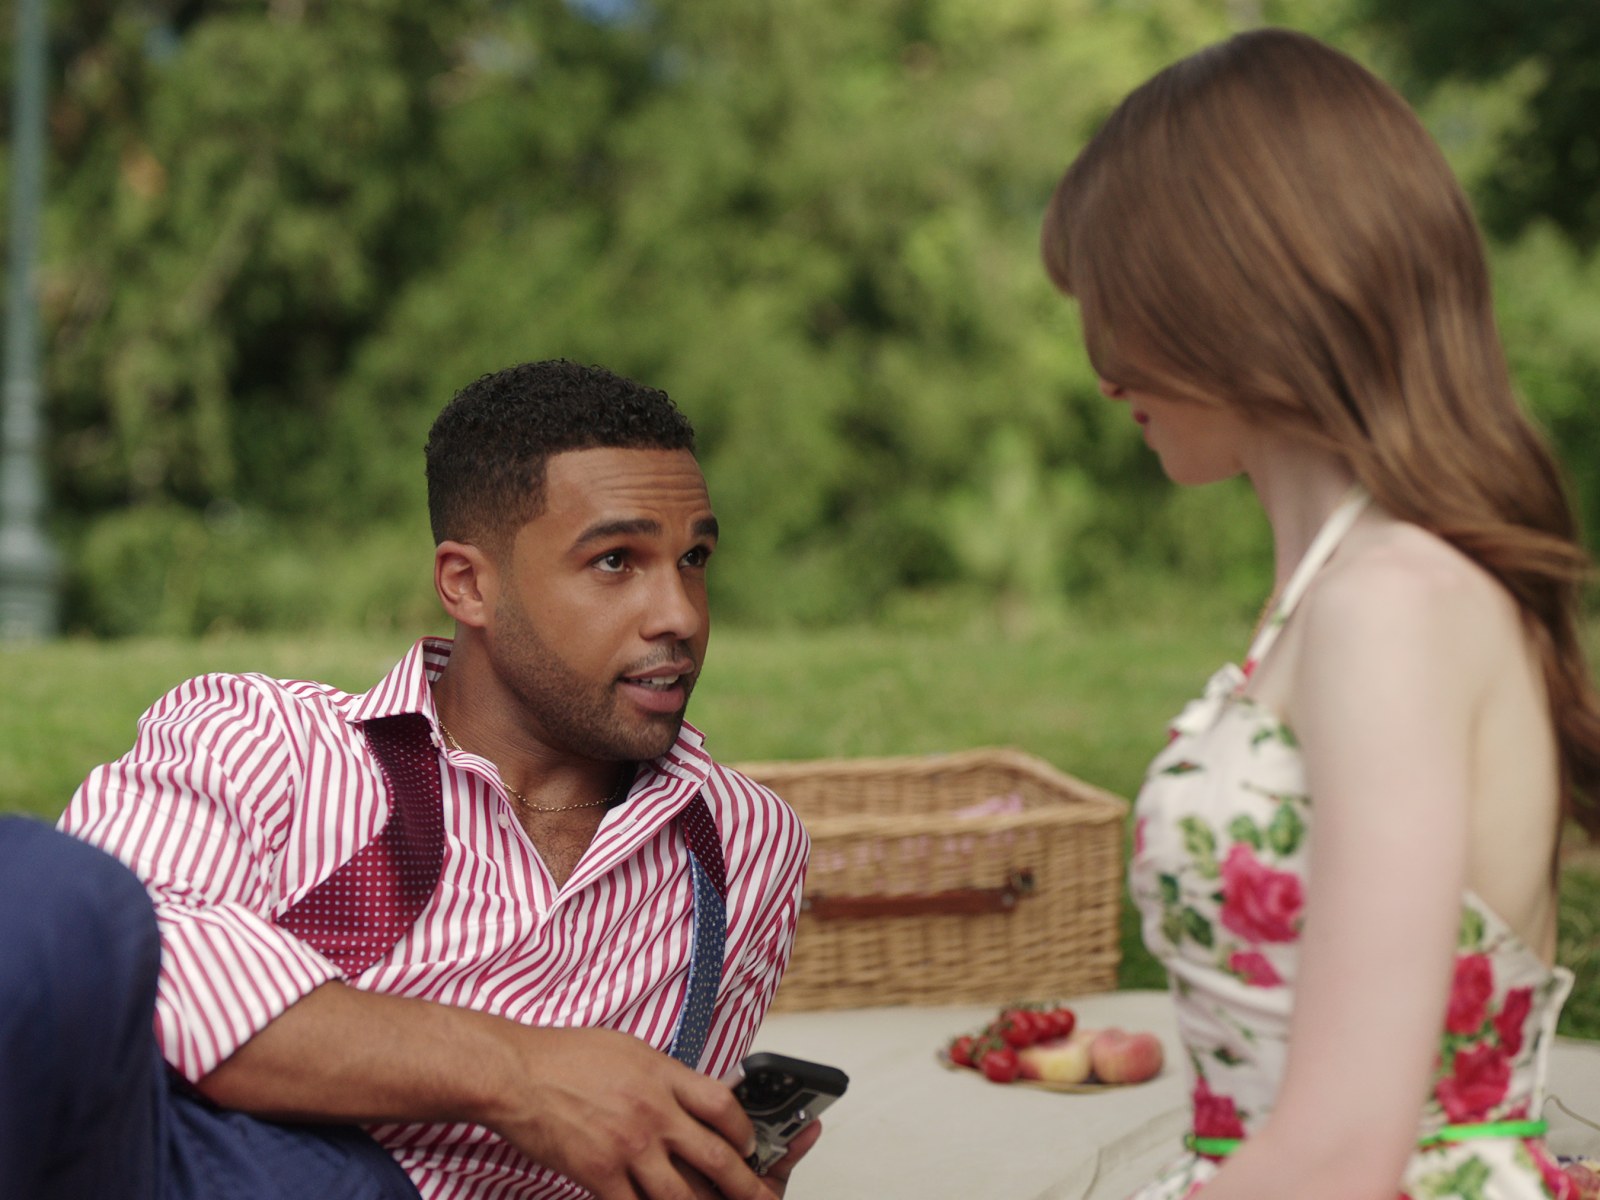 Emily in Paris'' Alfie: Where Else To Watch Lucien Laviscount on Screen -  Newsweek